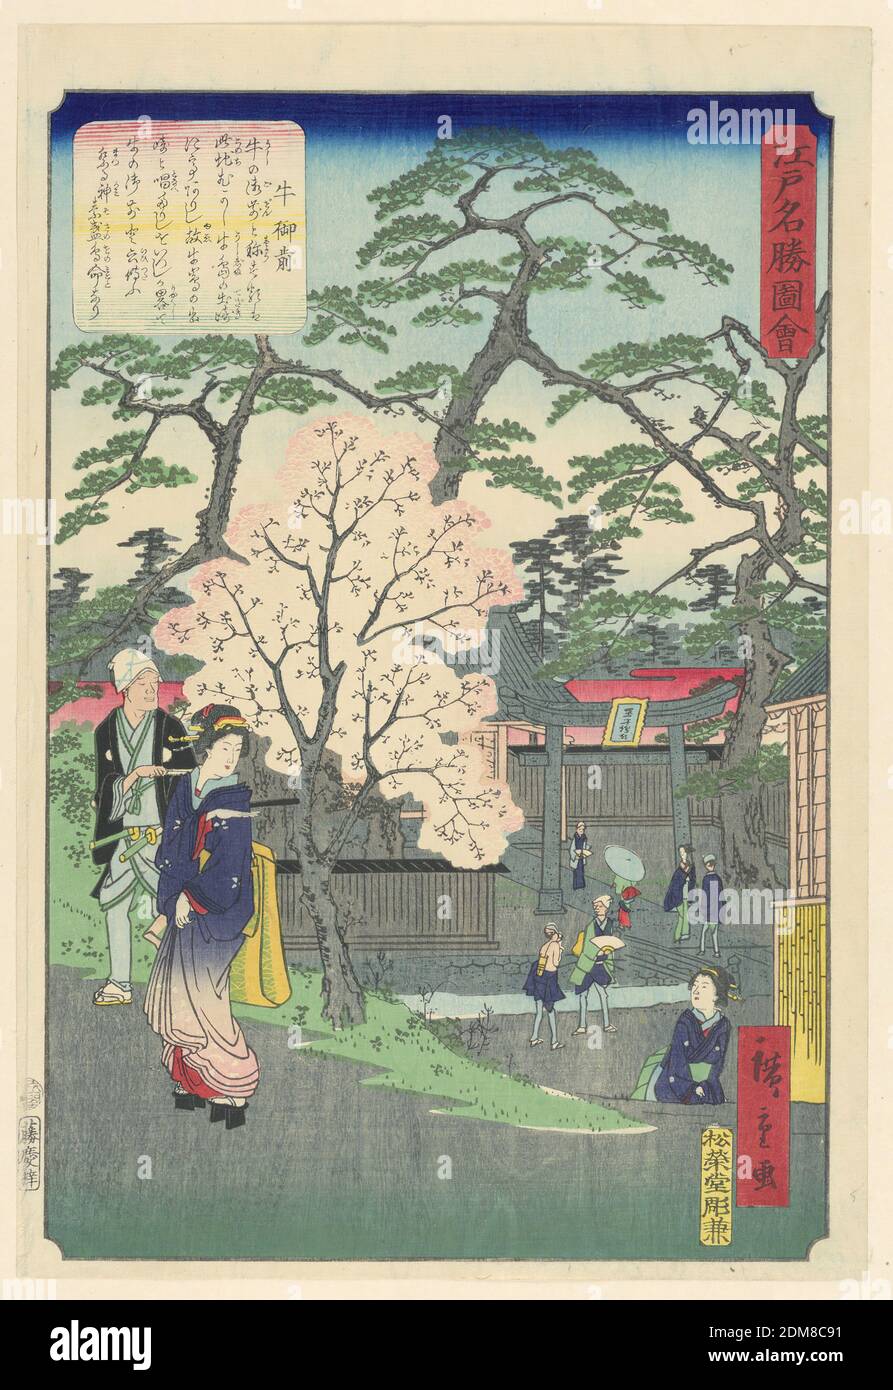 Spring day, Ando Hiroshige, Japanese, 1797–1858, Woodblock print in colored ink on paper, A woman who is accompanied by a man pauses to look back at a woman who appears to be calling her attention. In the background are people at the entrance of a shrine. The blooming cherry blossom highlights the base of the woman’s kimono., Japan, 1797-1858, landscapes, Print Stock Photo